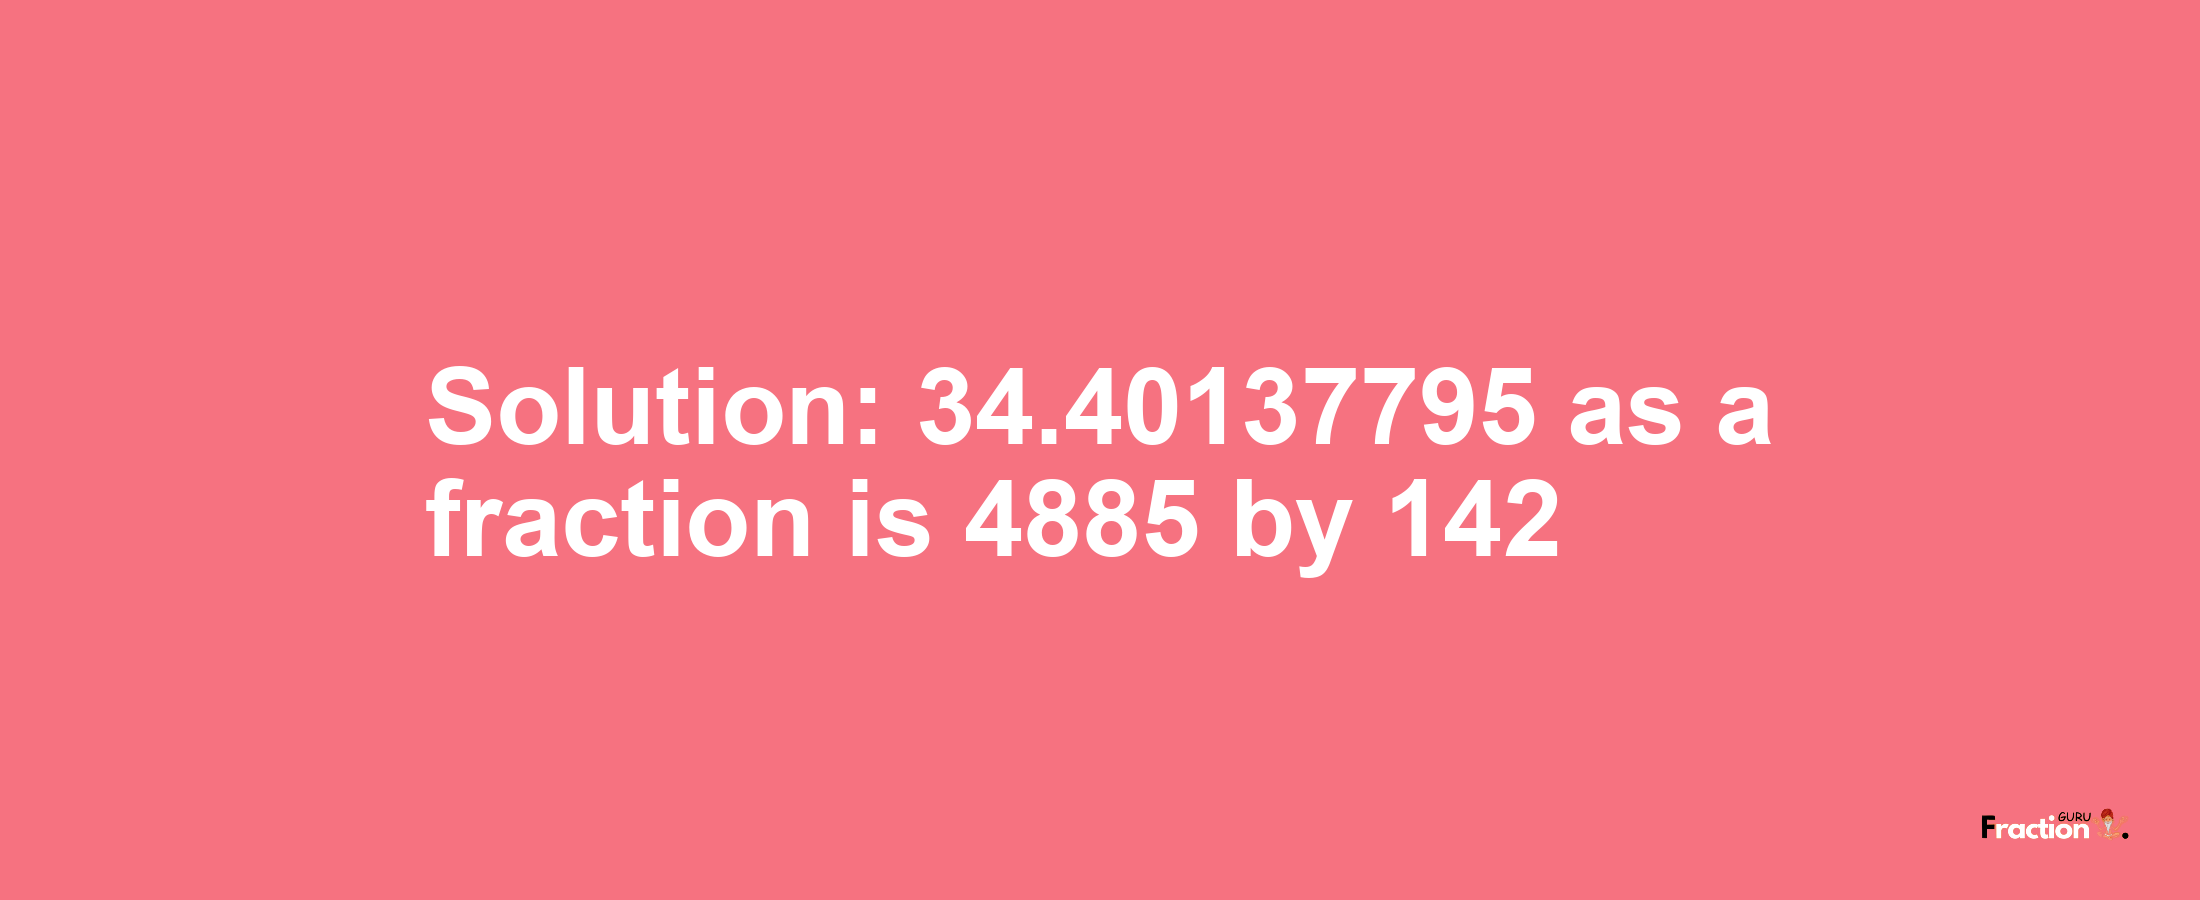 Solution:34.40137795 as a fraction is 4885/142